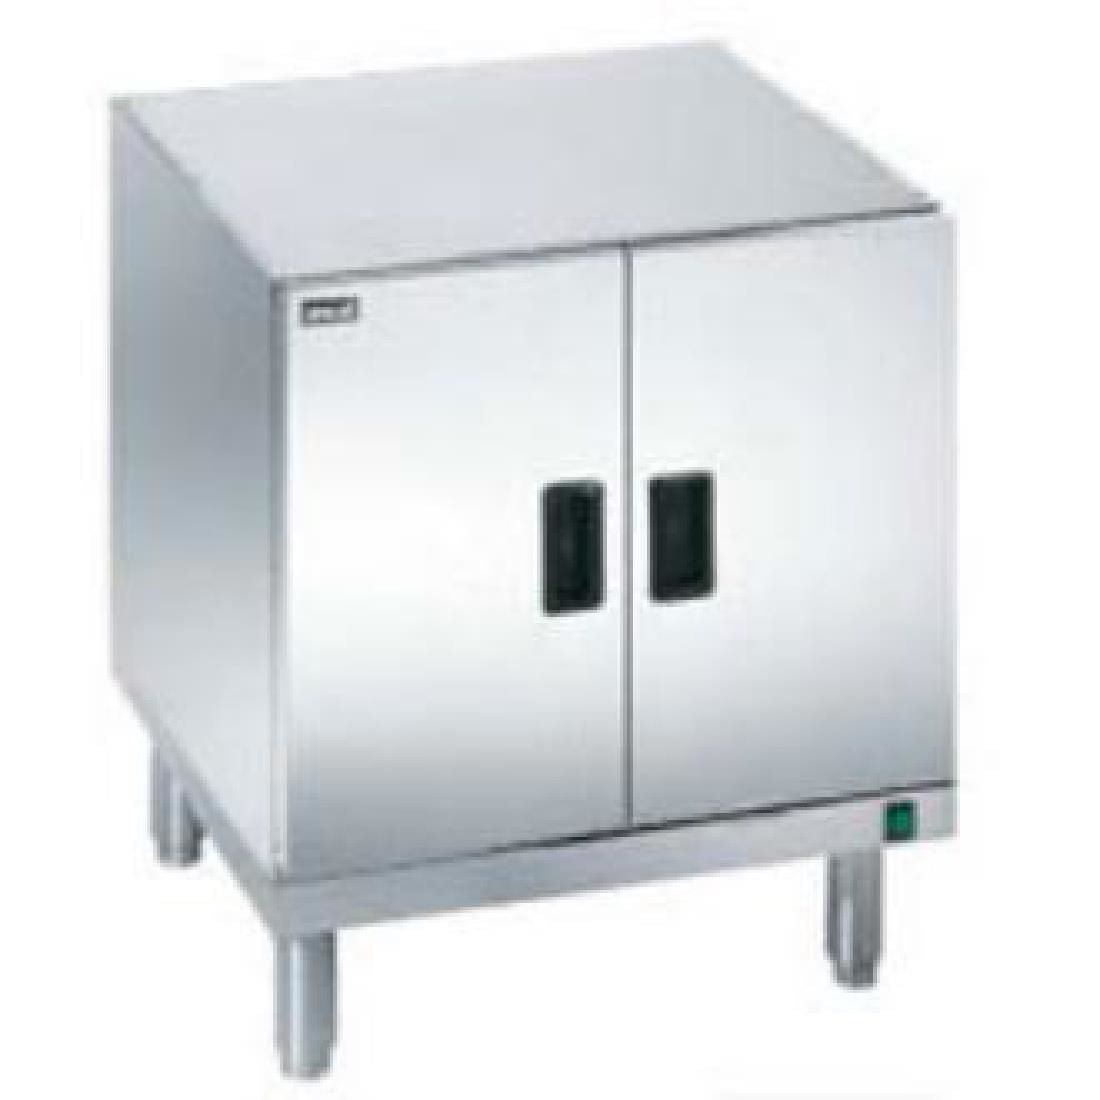 E398 Lincat Silverlink 600 Heated Pedestal With Top, Legs and Doors HCL6 JD Catering Equipment Solutions Ltd